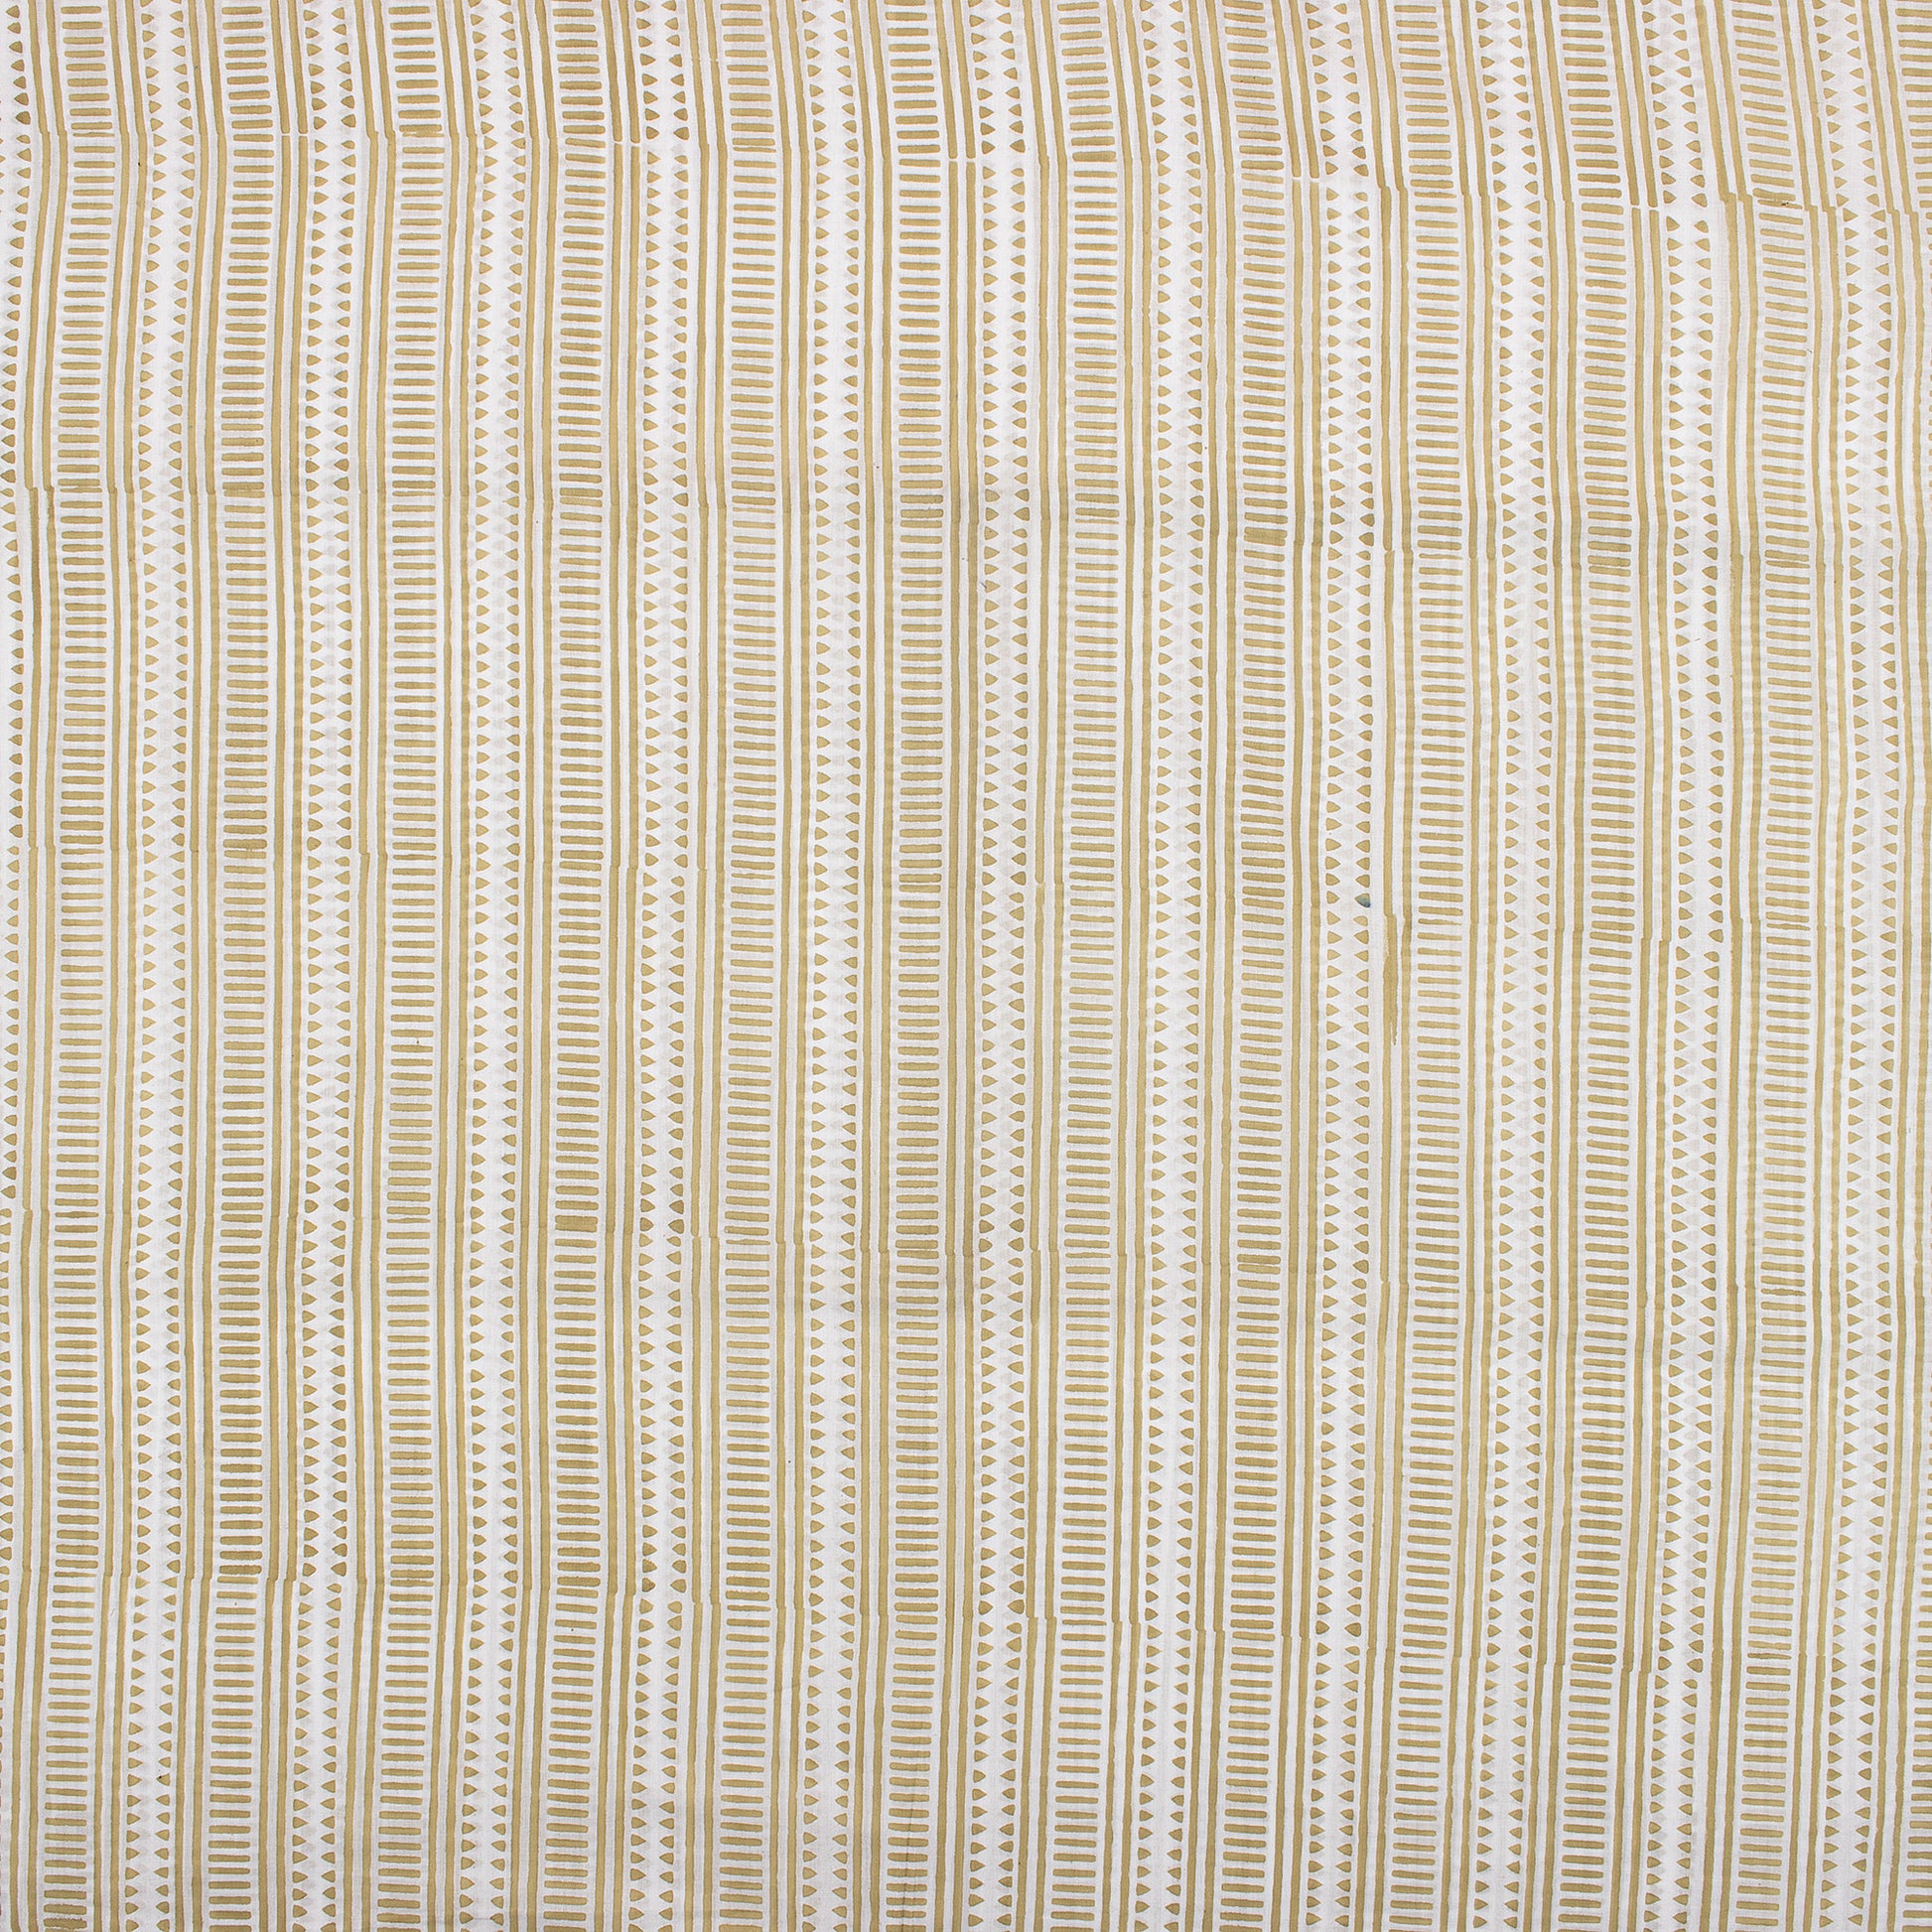 Stripes Printed Cotton Running Fabric